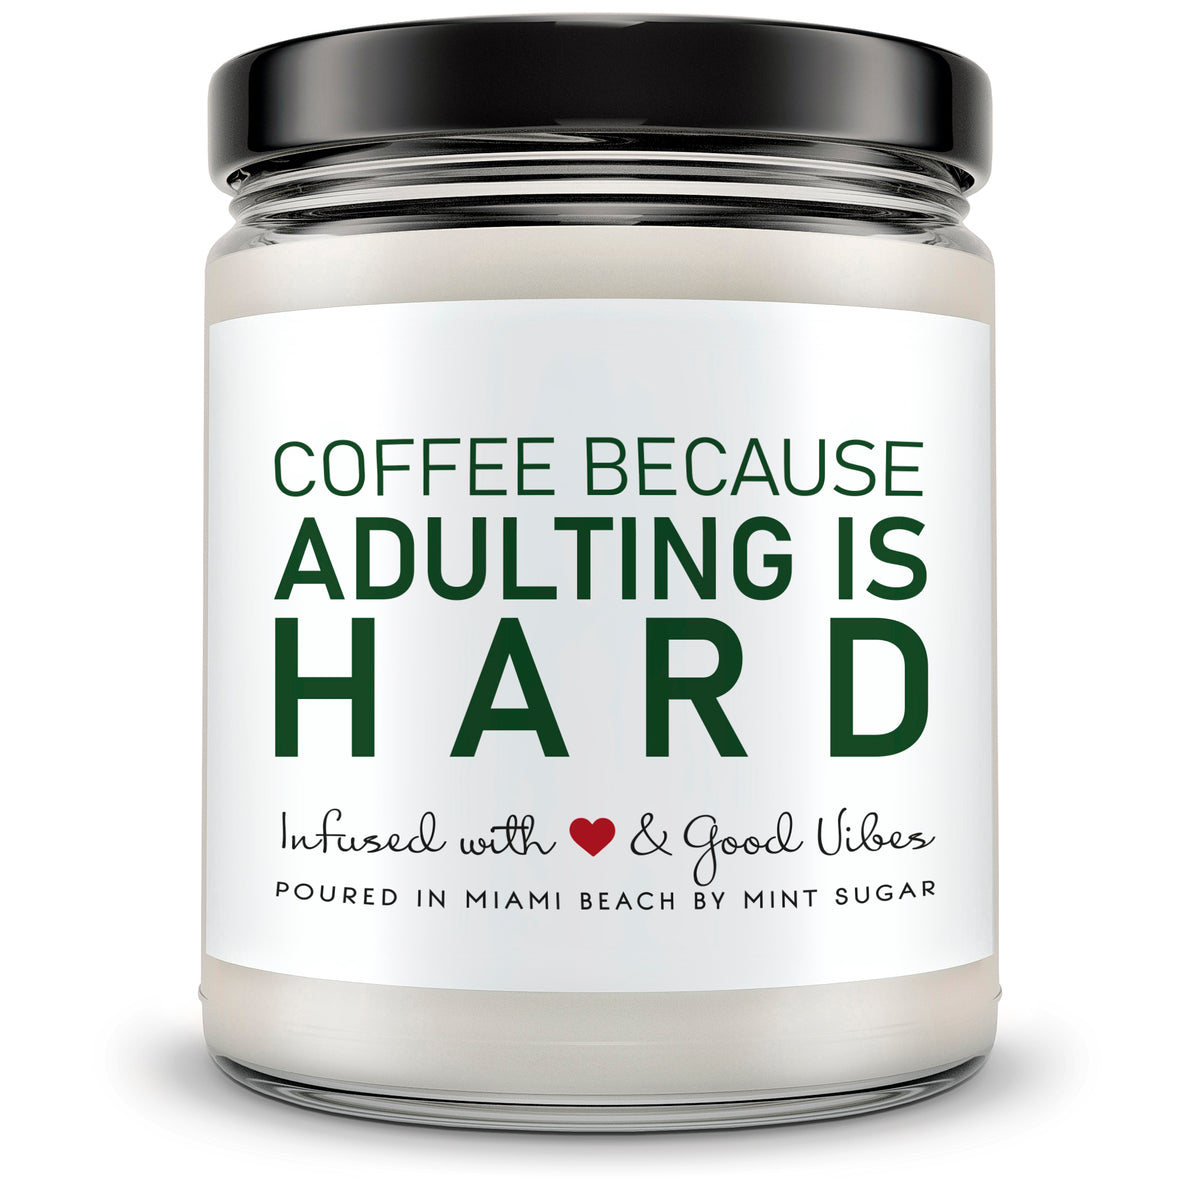 Adulting is hard... - Mint Sugar Candle